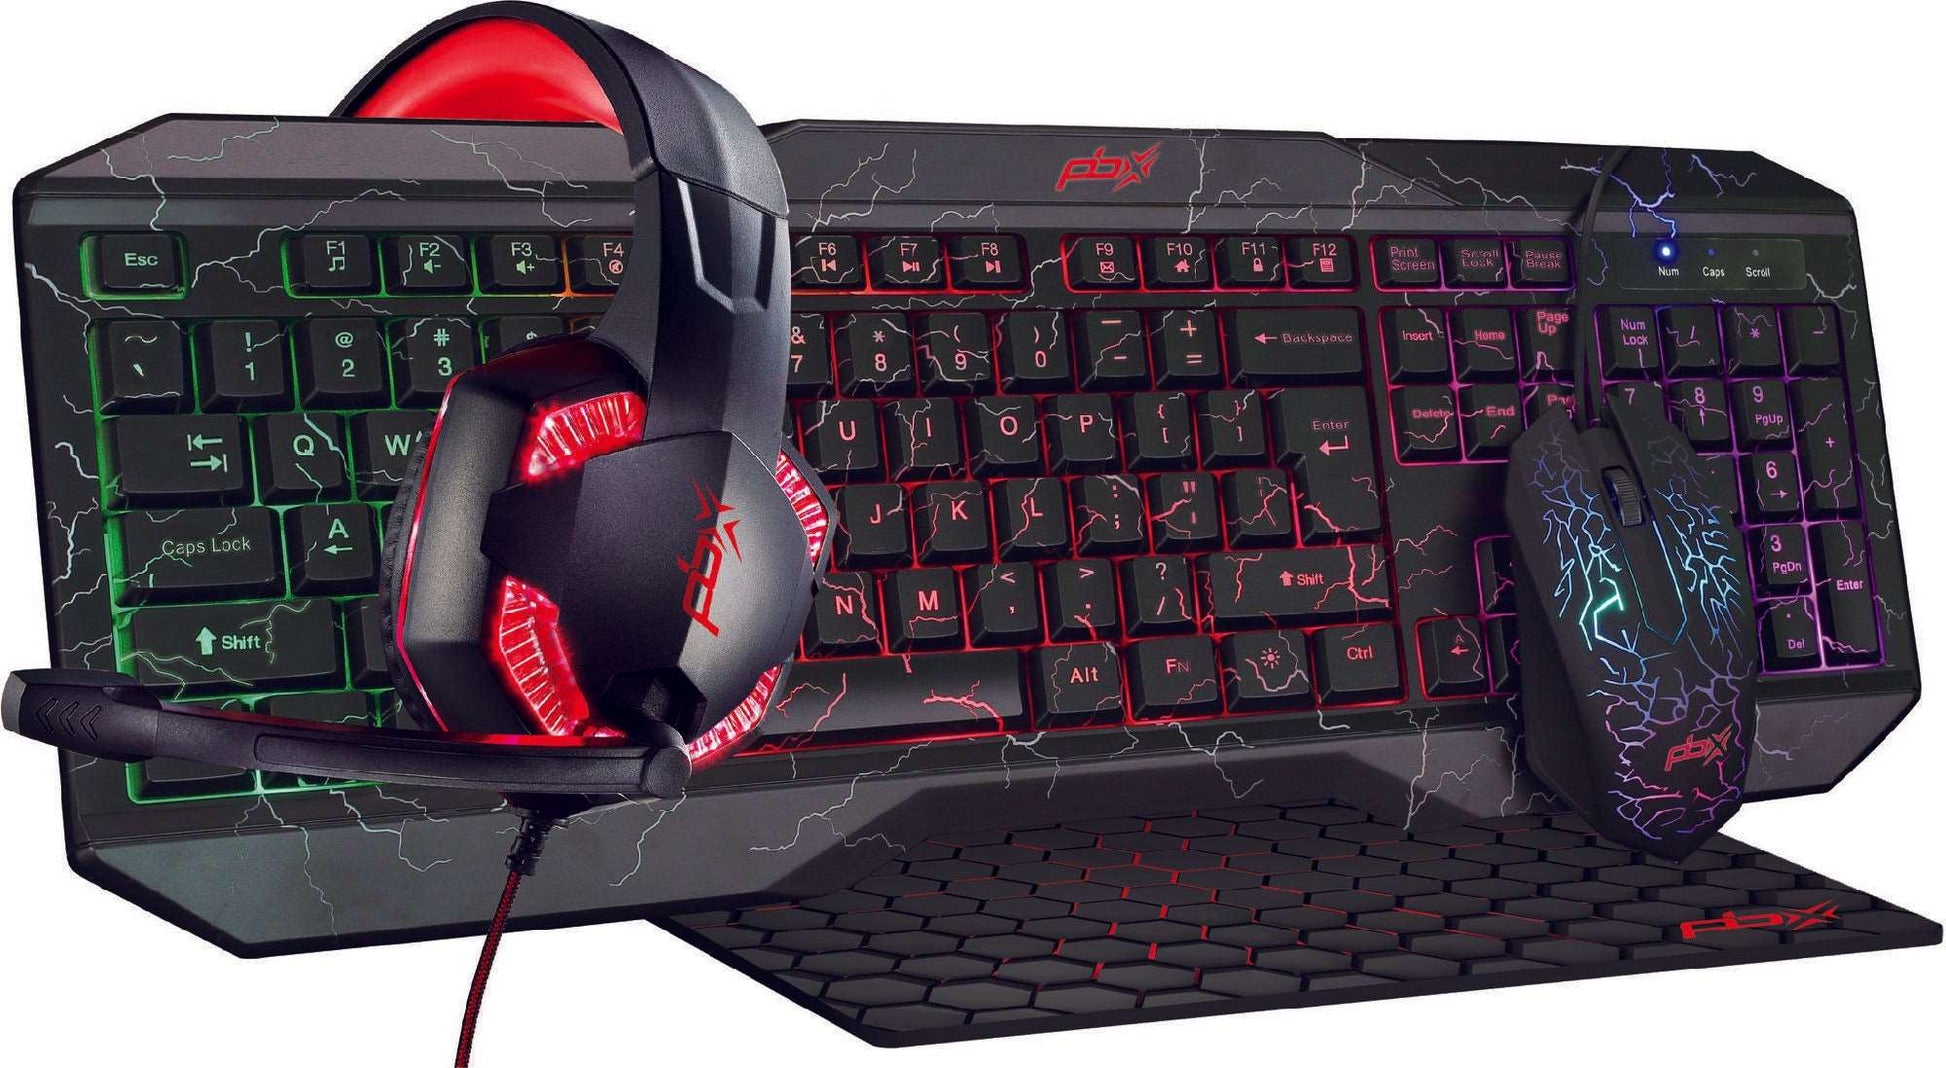 Ruckus 4-IN-1 Pro Gaming Kit - Headphones, Keyboard, Mouse, and Mousepad for an Ultimate Gaming Experience